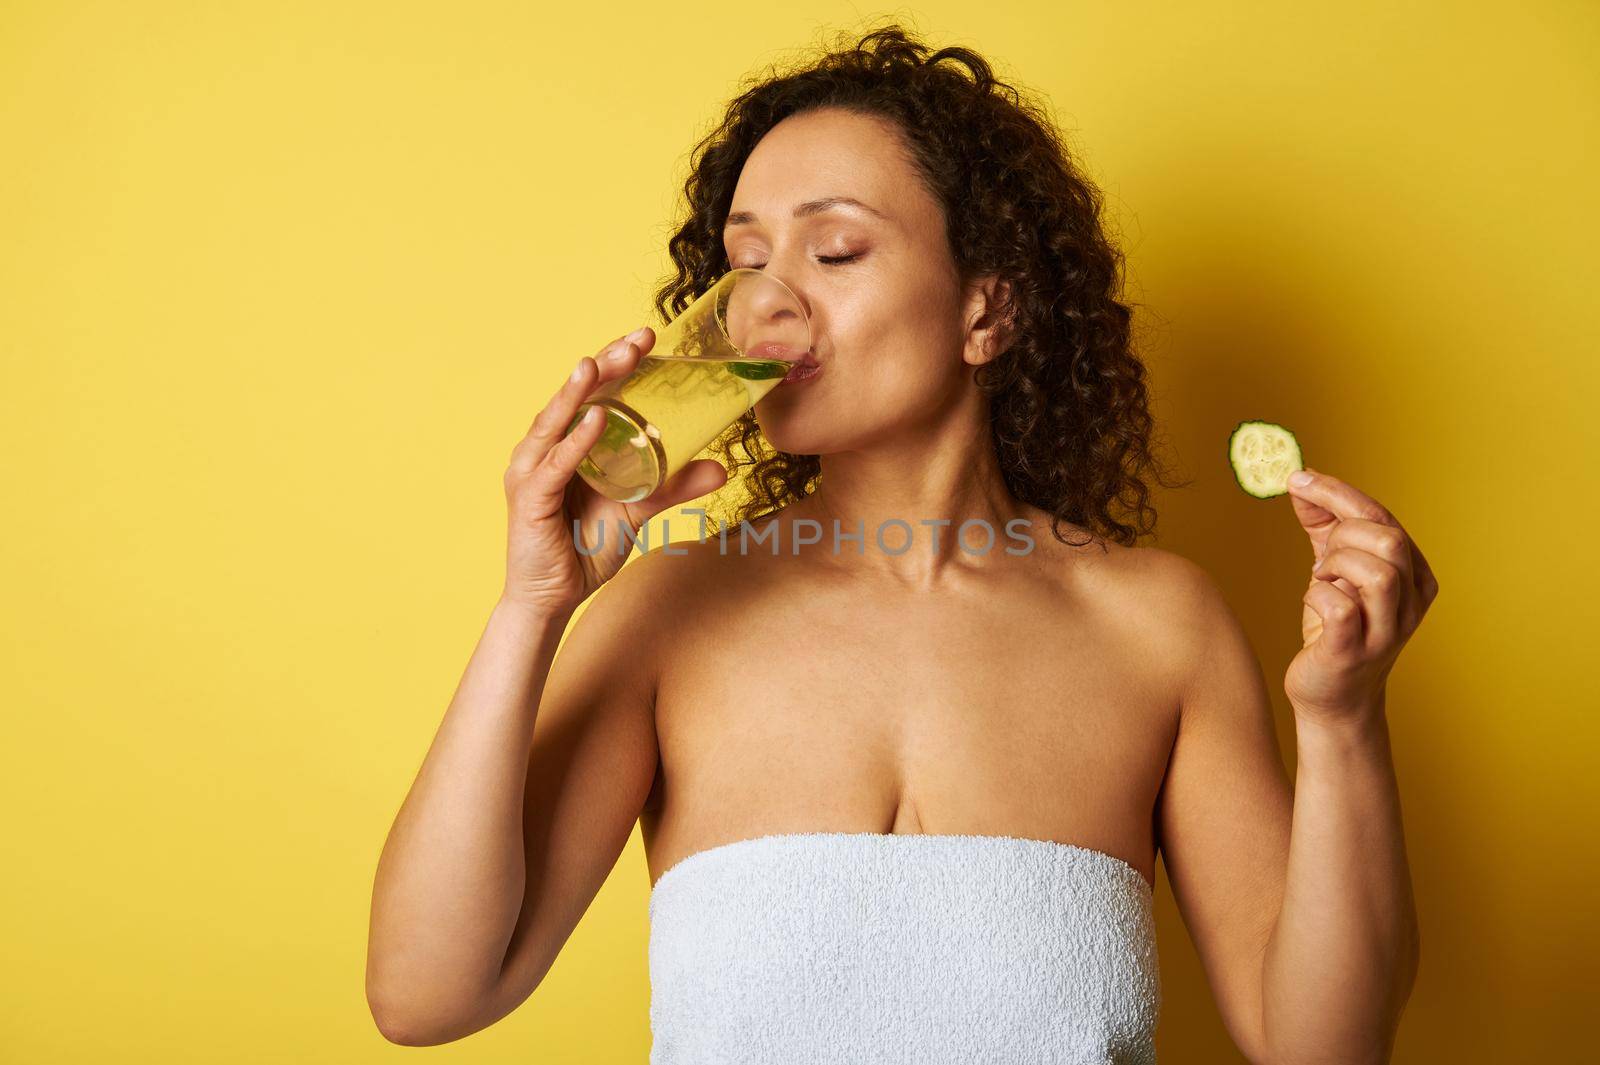 Young half-naked woman, wrapped in a towel, holding a slice of cucumber and drinking water from a glass, standing against a yellow background by artgf